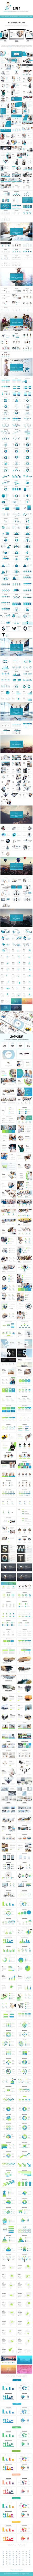 2 in 1 Clean Pitch Deck Powerpoint Template